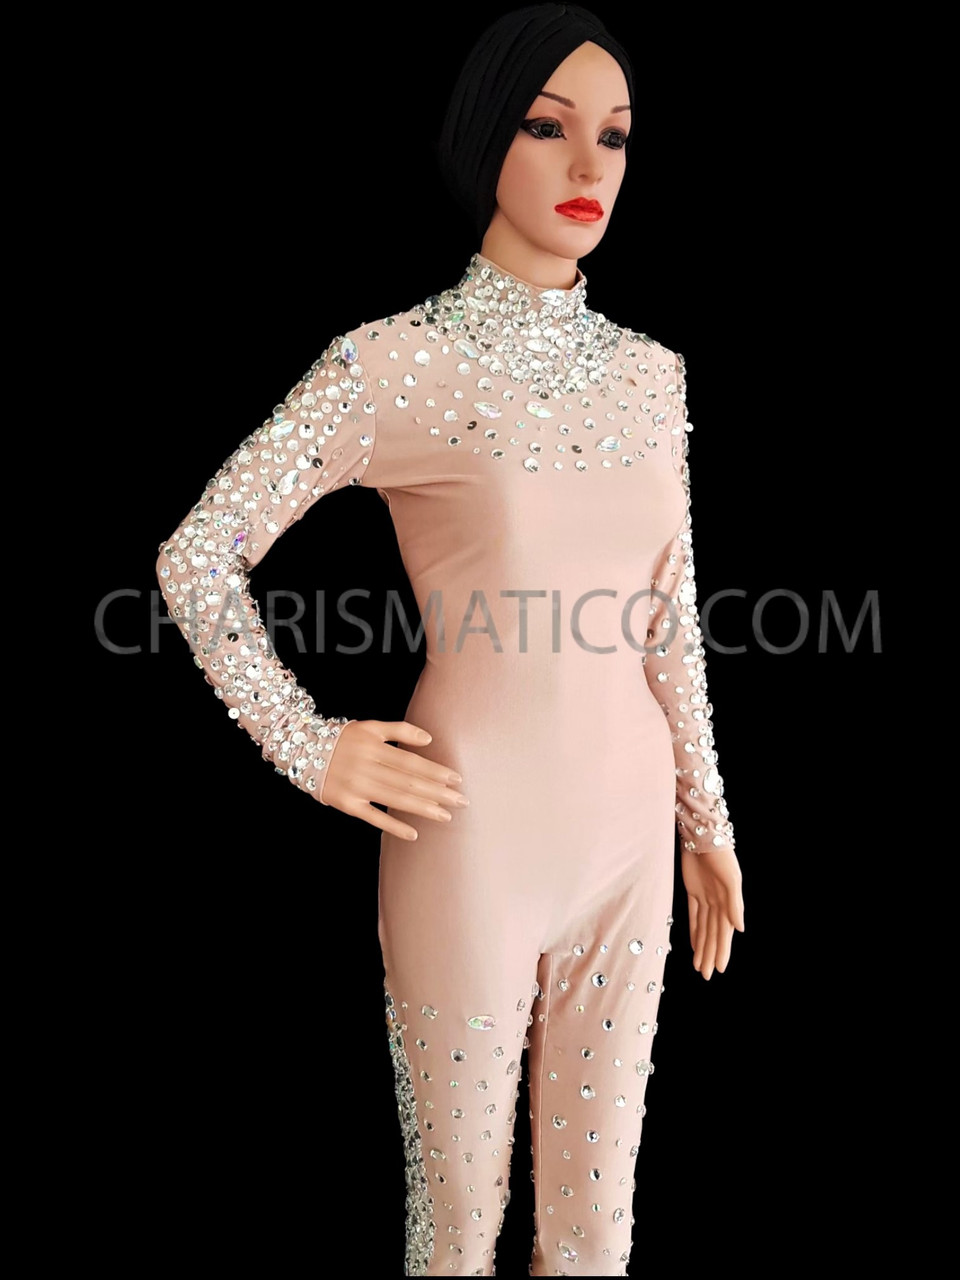 https://cdn11.bigcommerce.com/s-07991/images/stencil/1280x1280/products/928/60502/_Nude_Spandex_Catsuit_Styled_Body_Stocking_With_Iridescent_Crystal_Detailing_BL0702_1__55517.1610180197.jpg?c=2